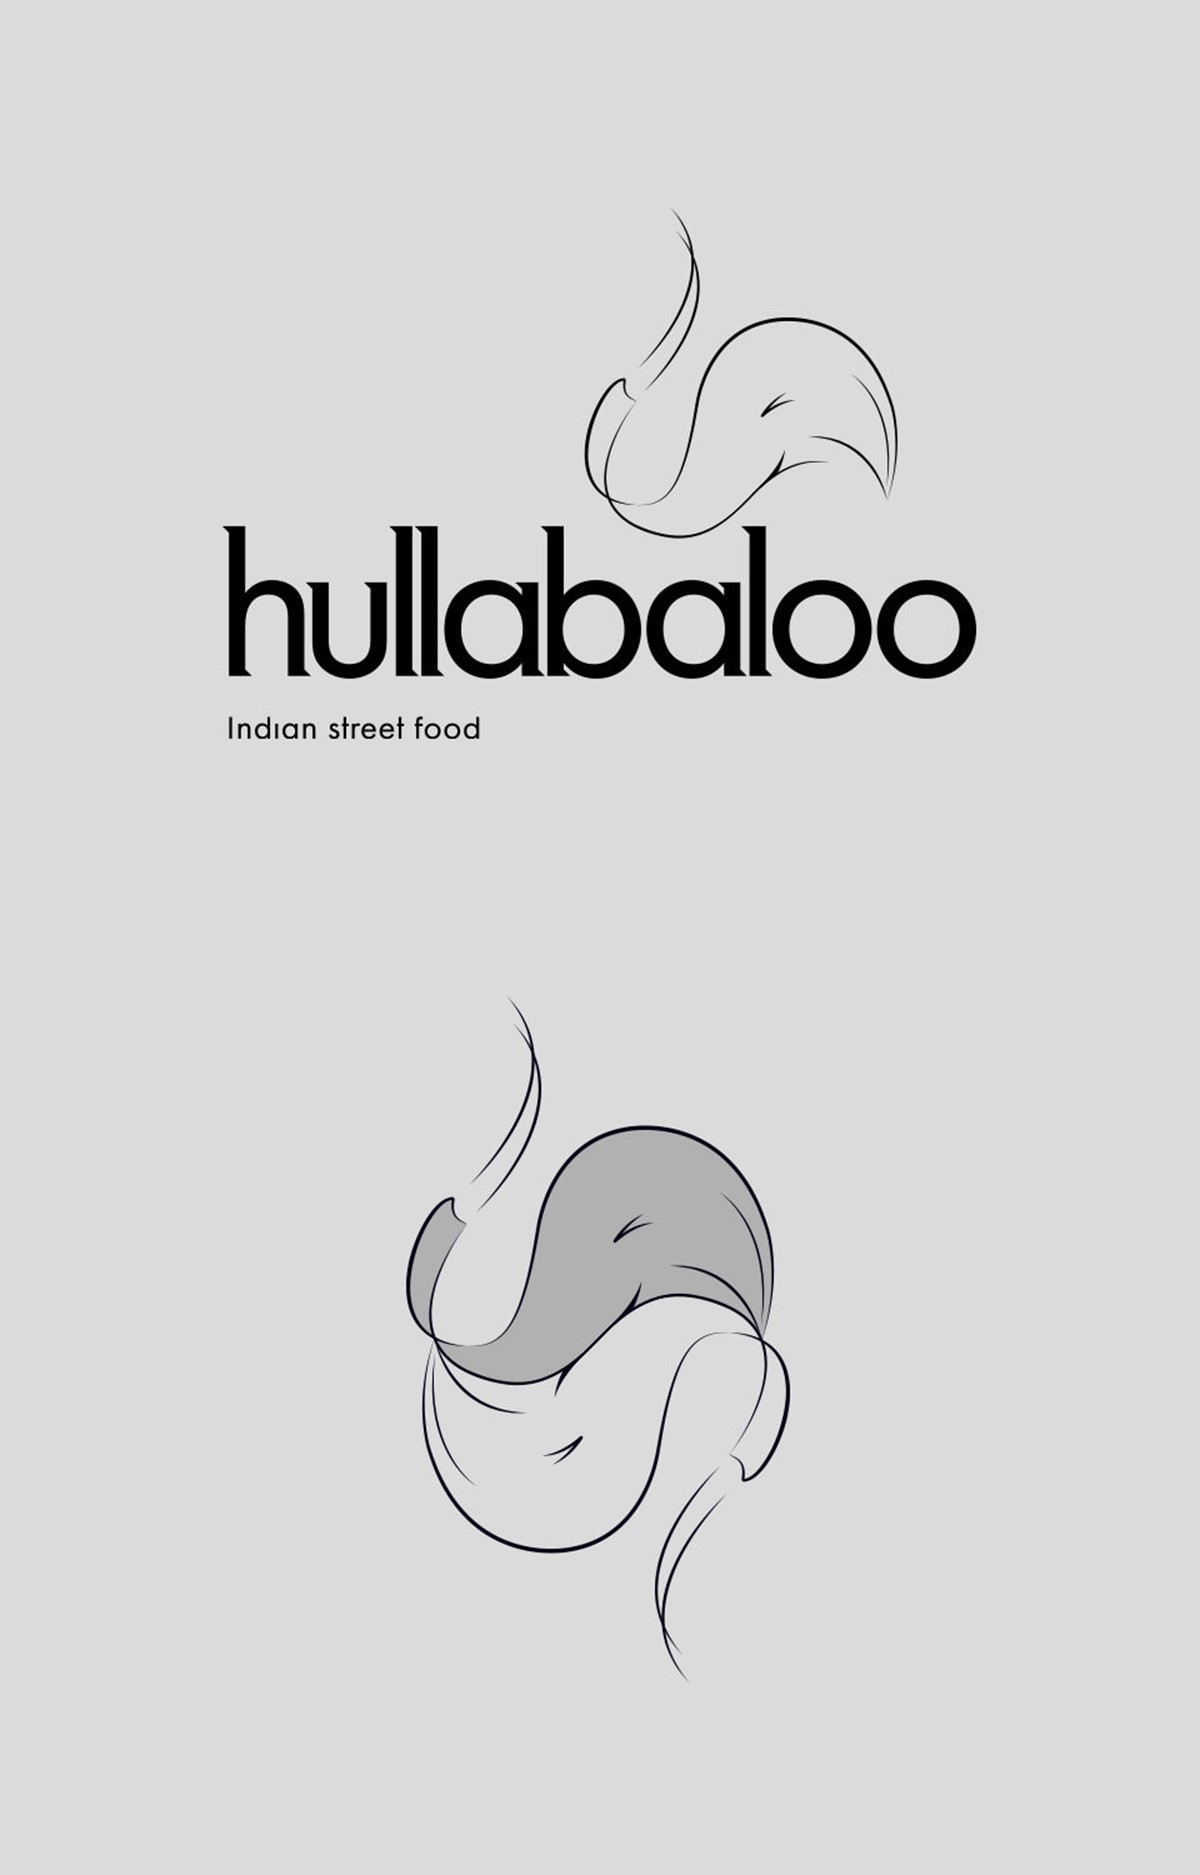 Hullabaloo. Indian Street Food. Elephant logo and lock-up. Brand identity design by Superfried.